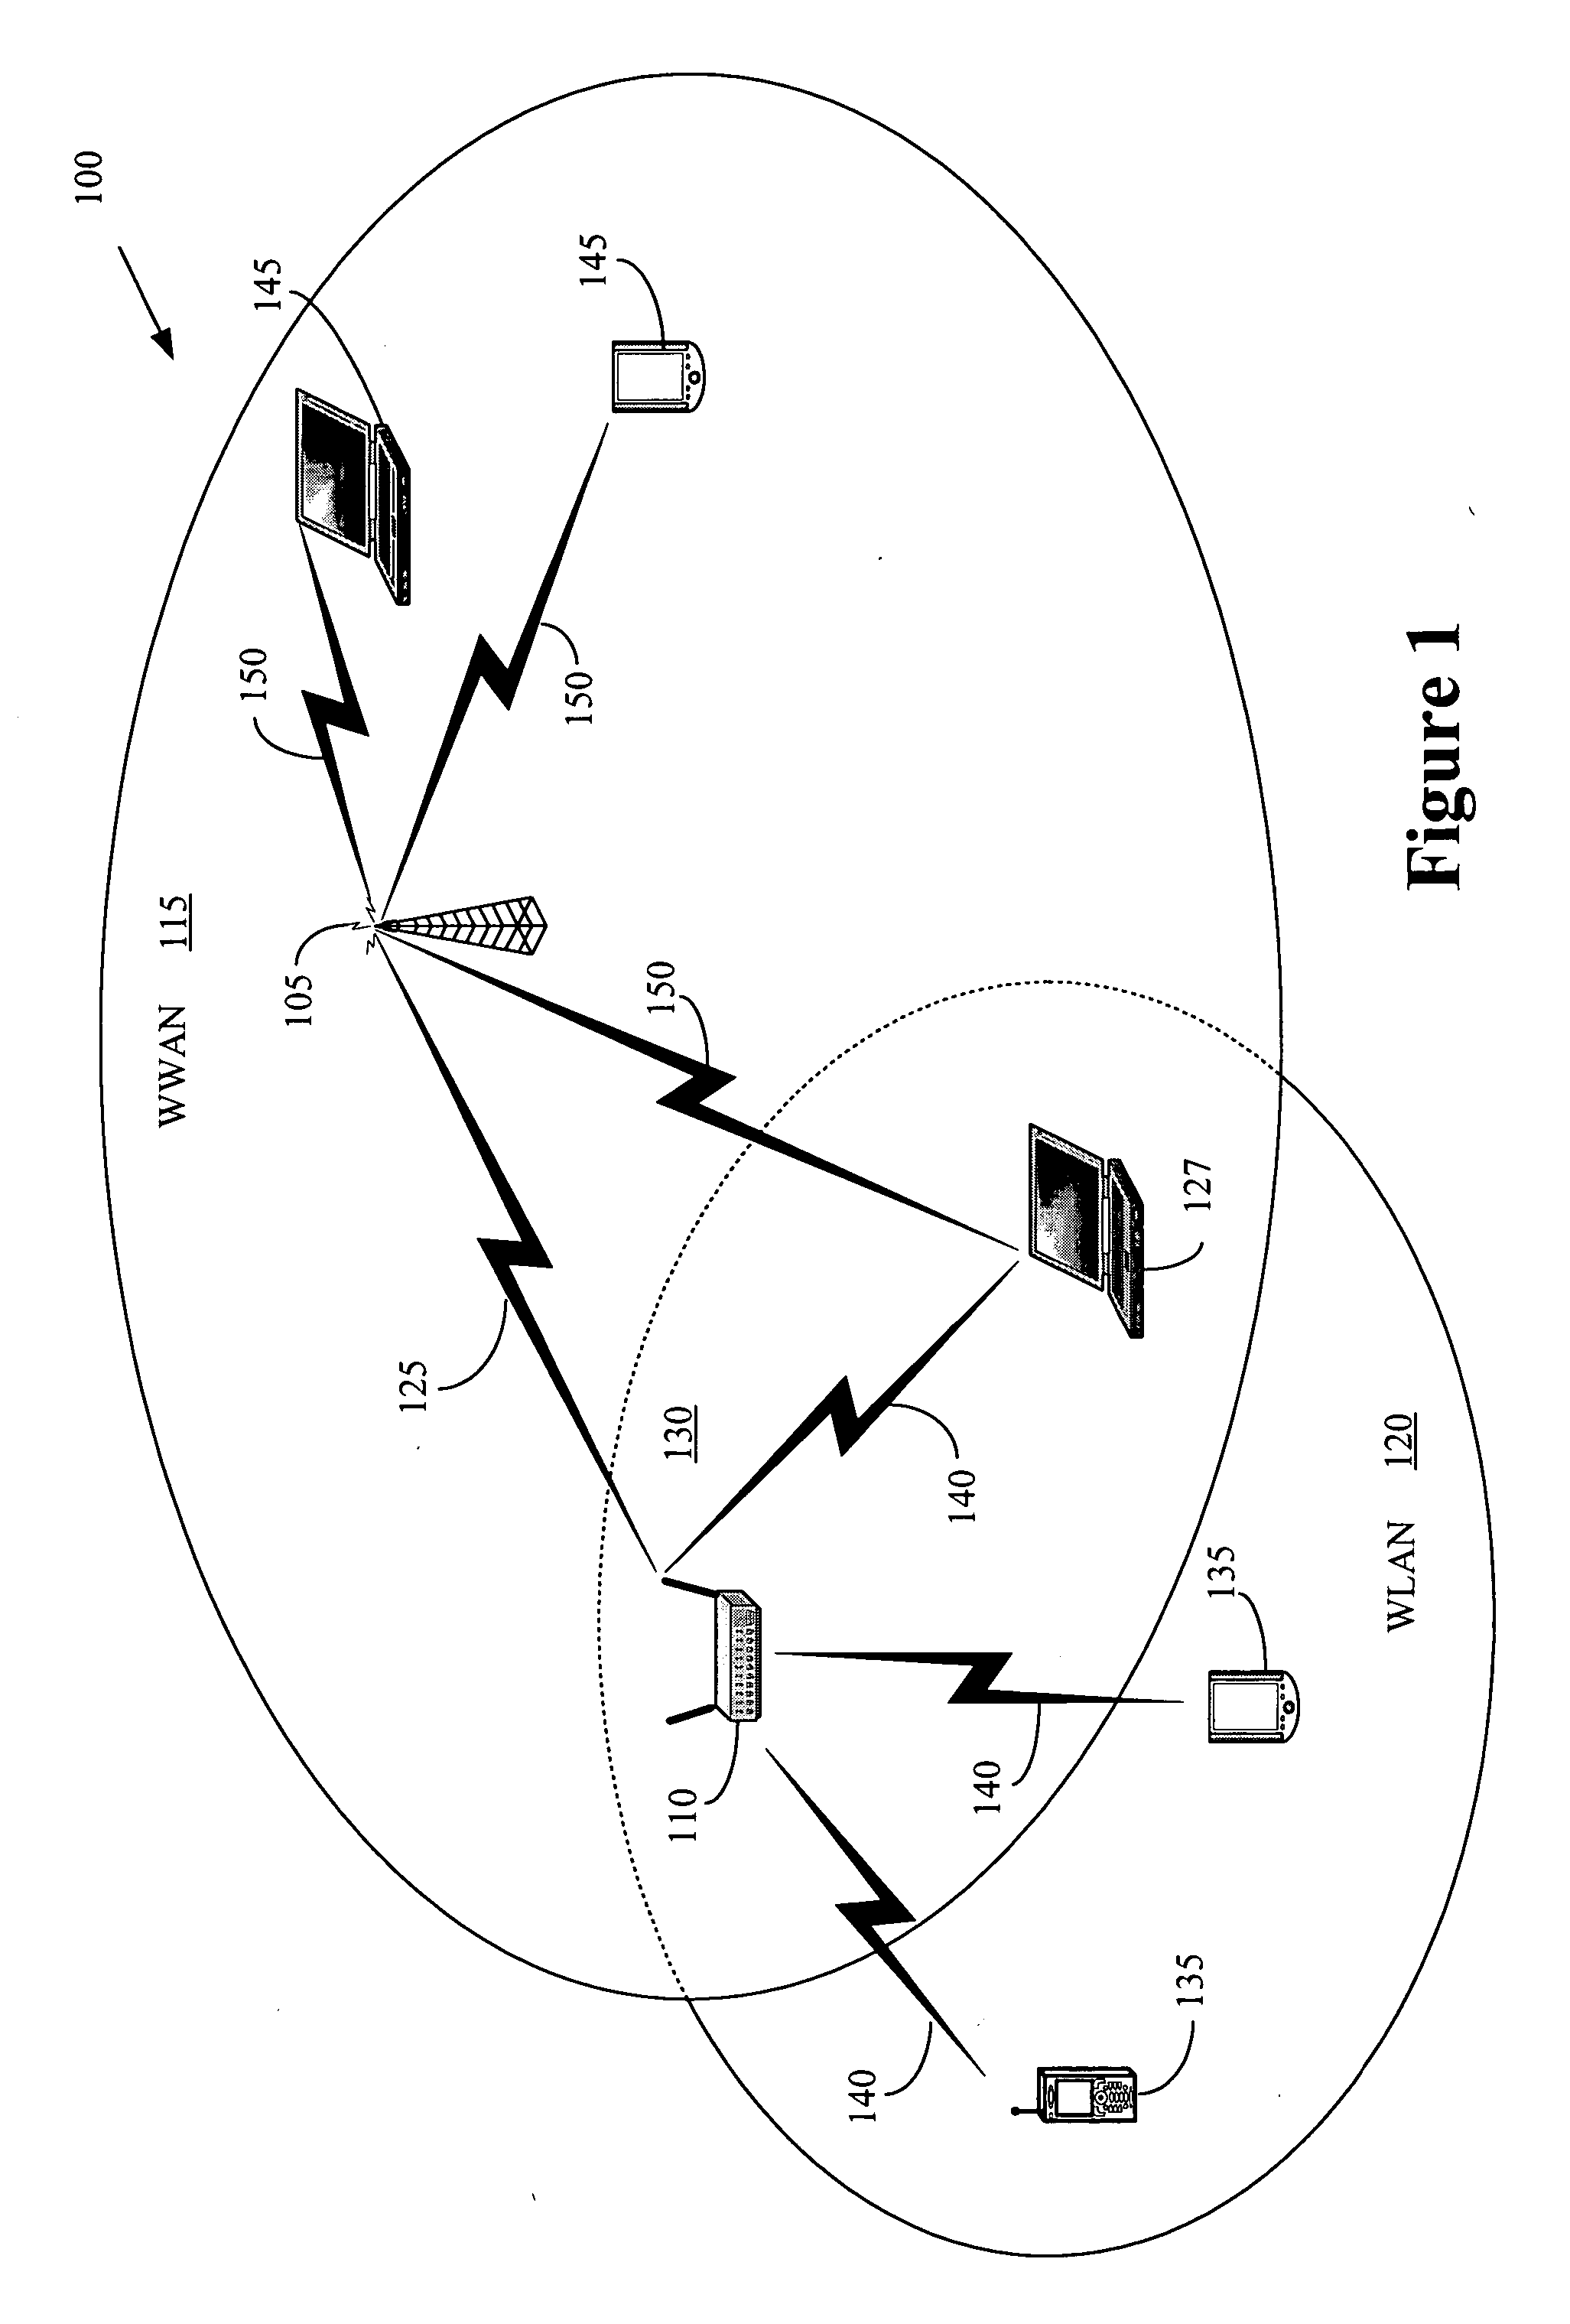 Method for vertical handoff in a hierarchical network